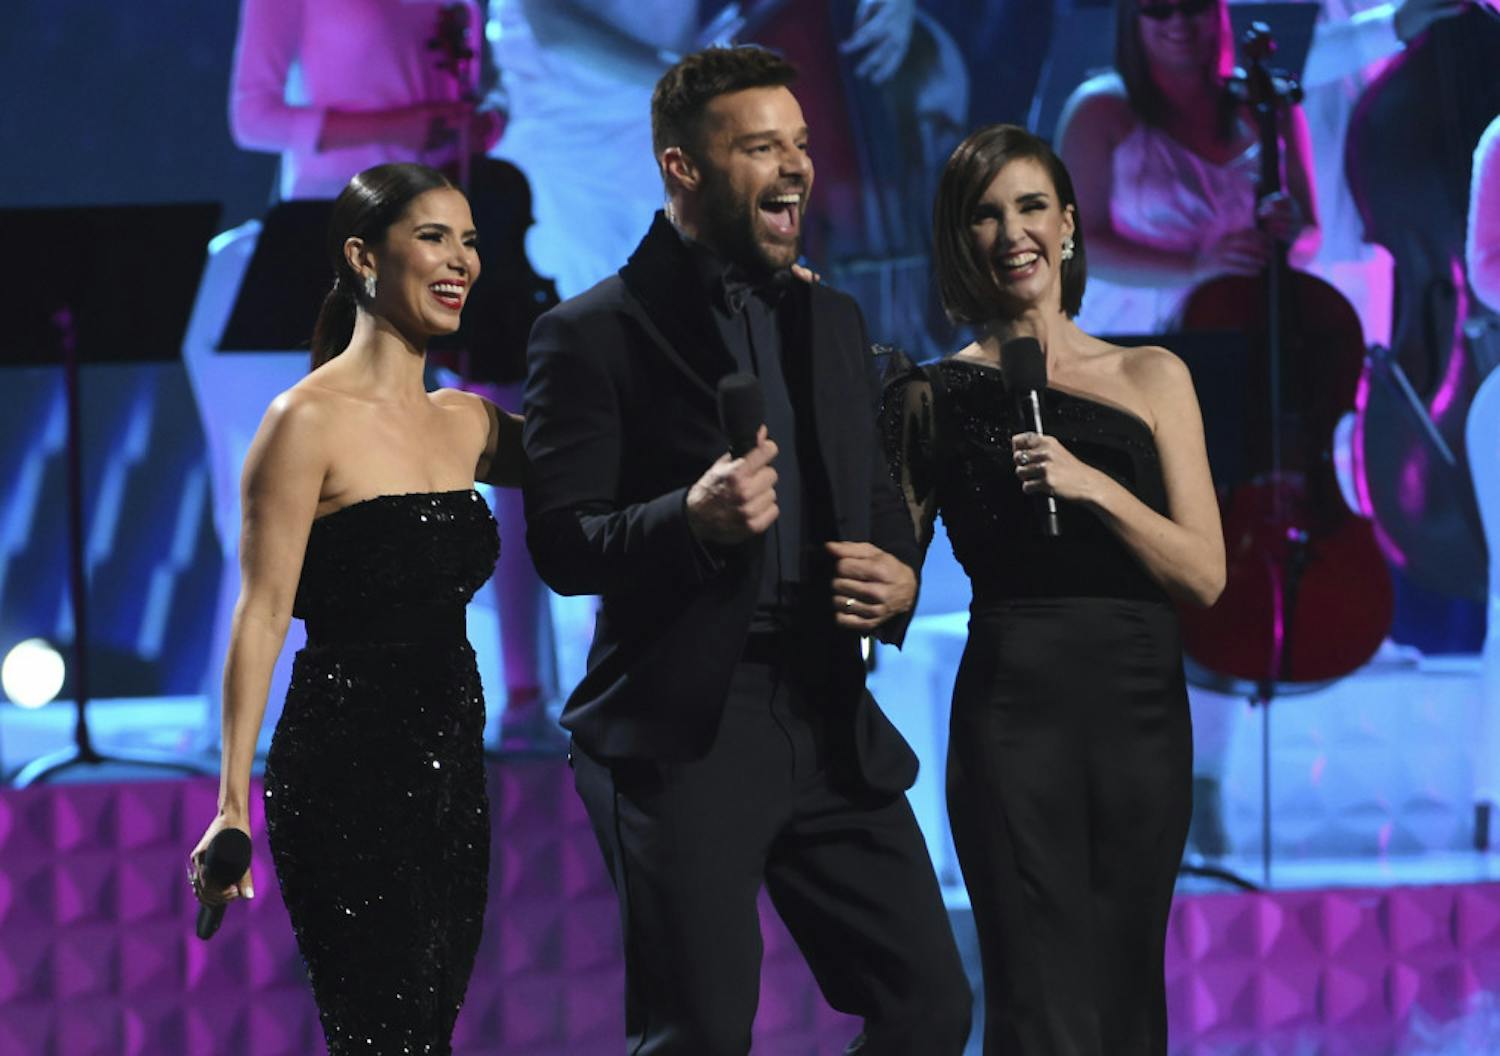 Hosts Roselyn Sanchez, from left, Ricky Martin and Paz Vega speak at the conclusion of the 20th Latin Grammy Awards on Thursday, Nov. 14, 2019, at the MGM Grand Garden Arena in Las Vegas. (AP Photo/Chris Pizzello)